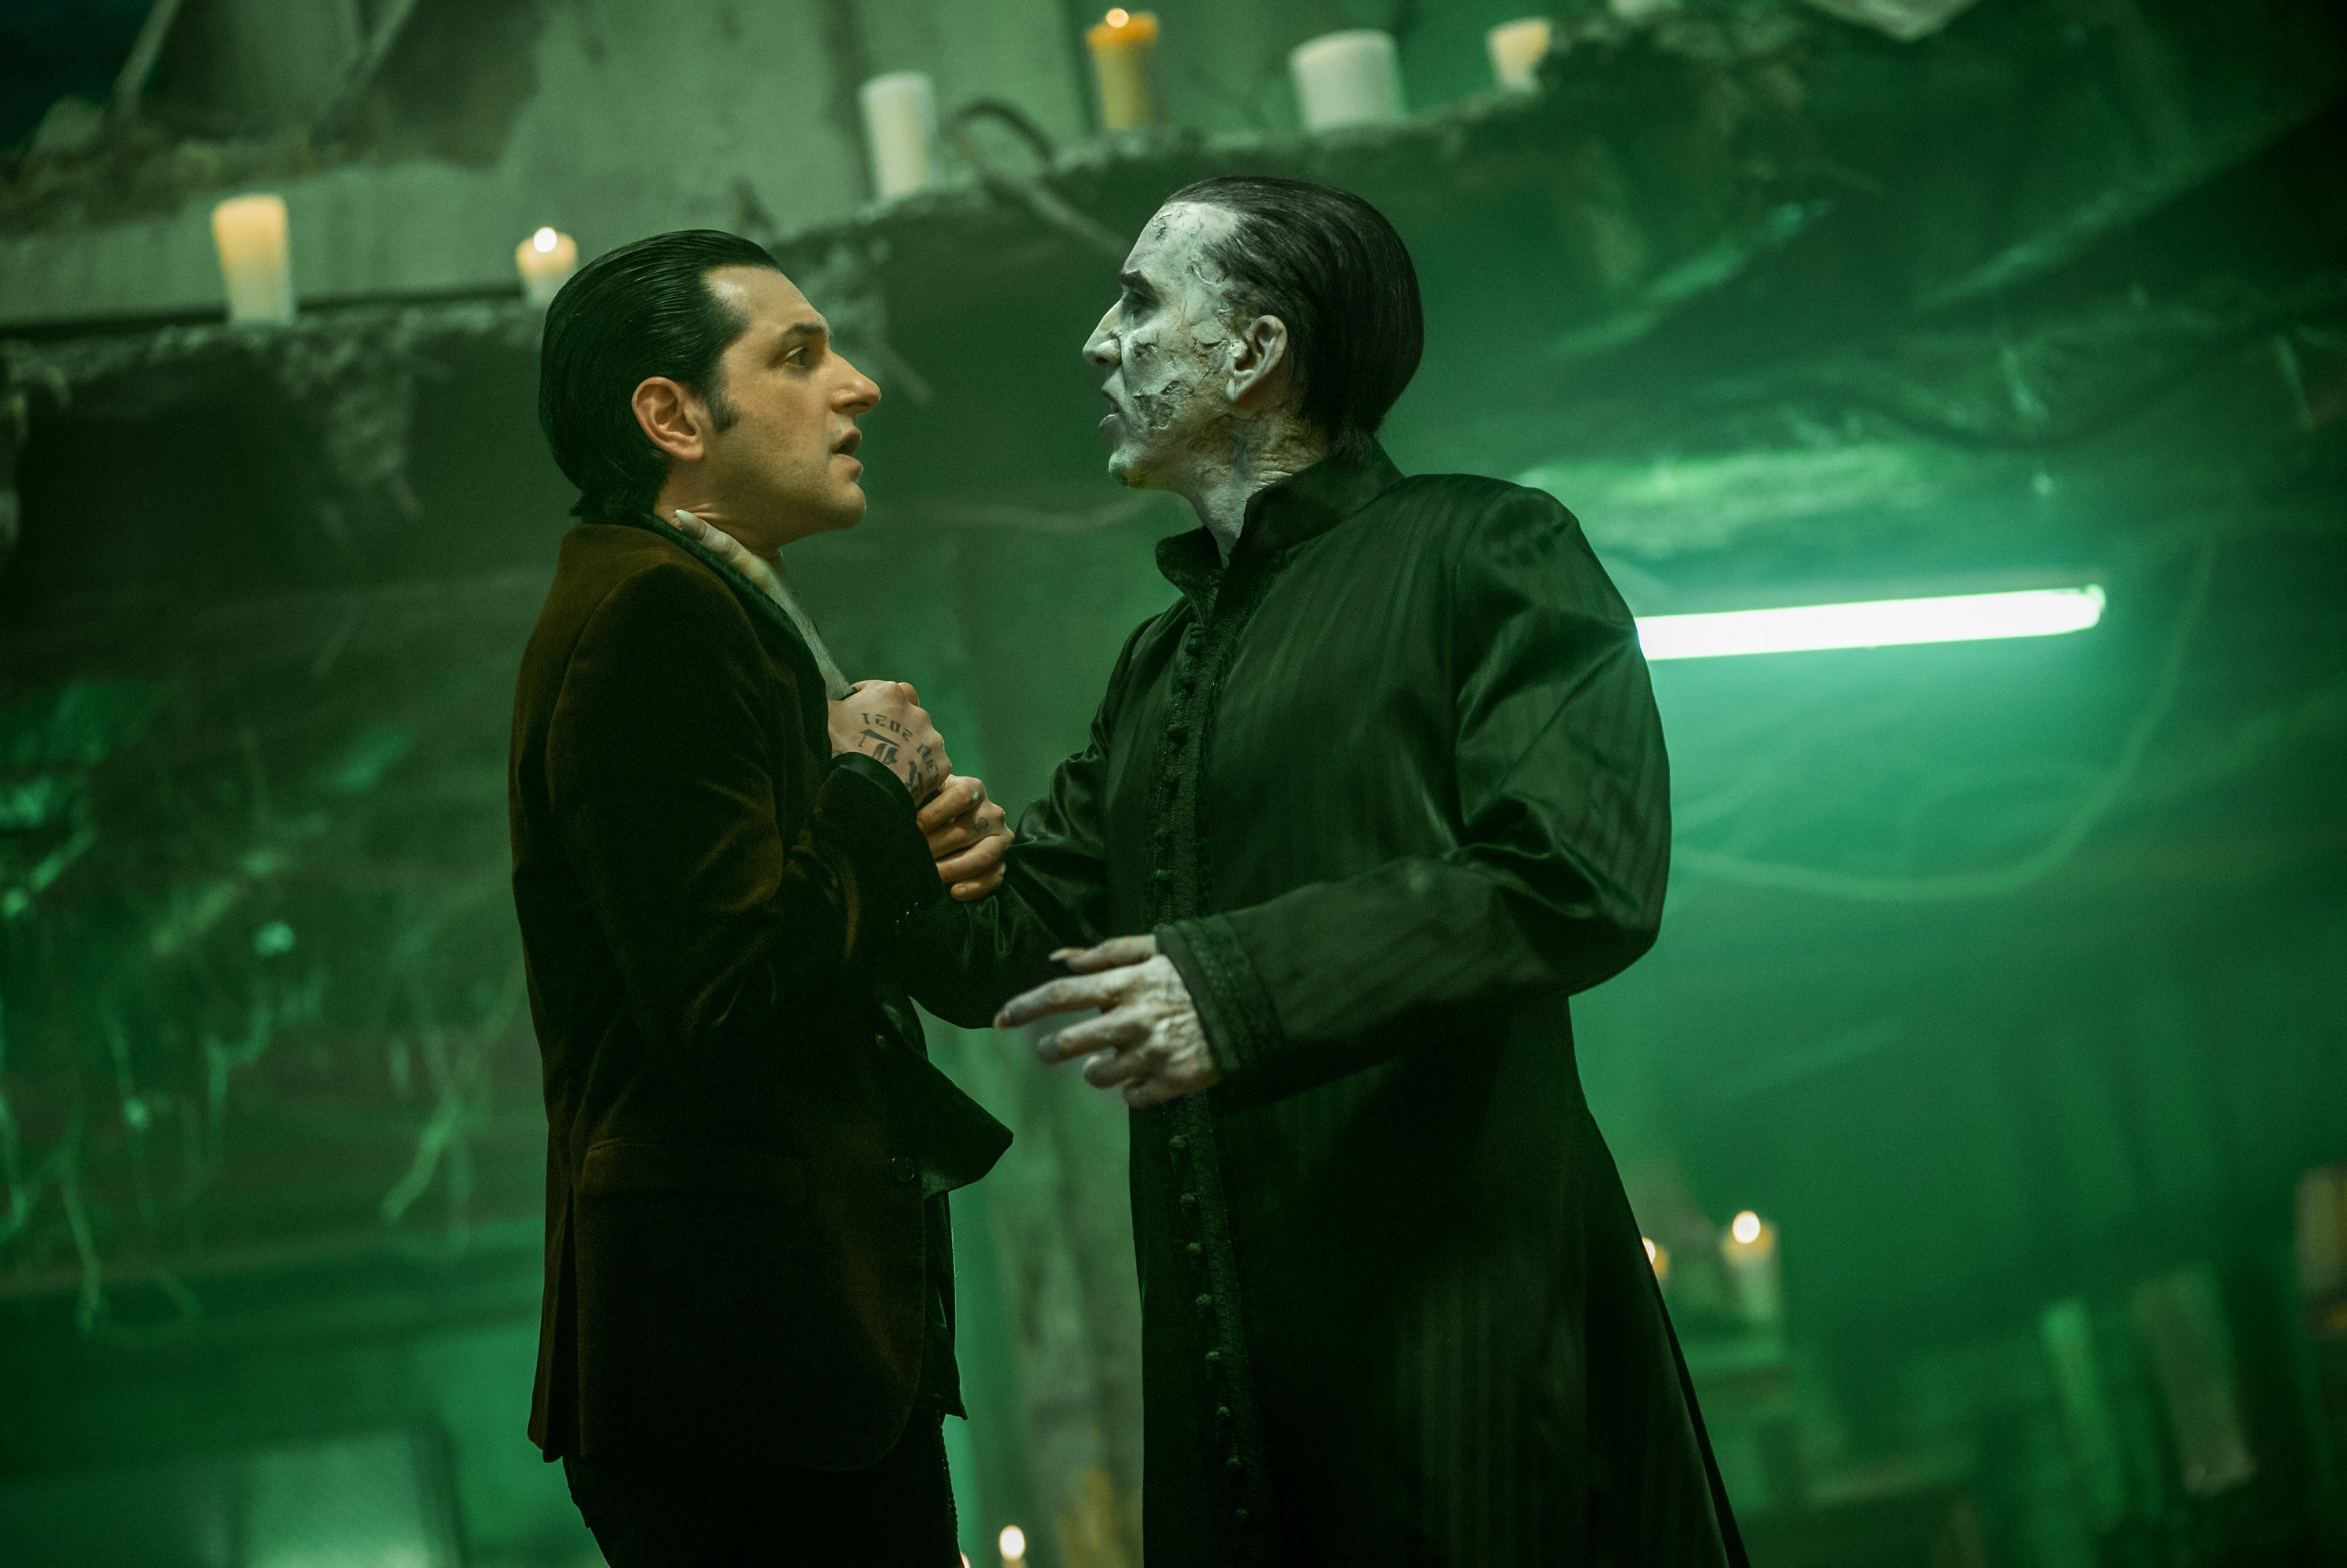 Nicholas Cage as Dracula and Nicholas Hoult as Renfield in 'Renfield'. Image: Universal Pictures